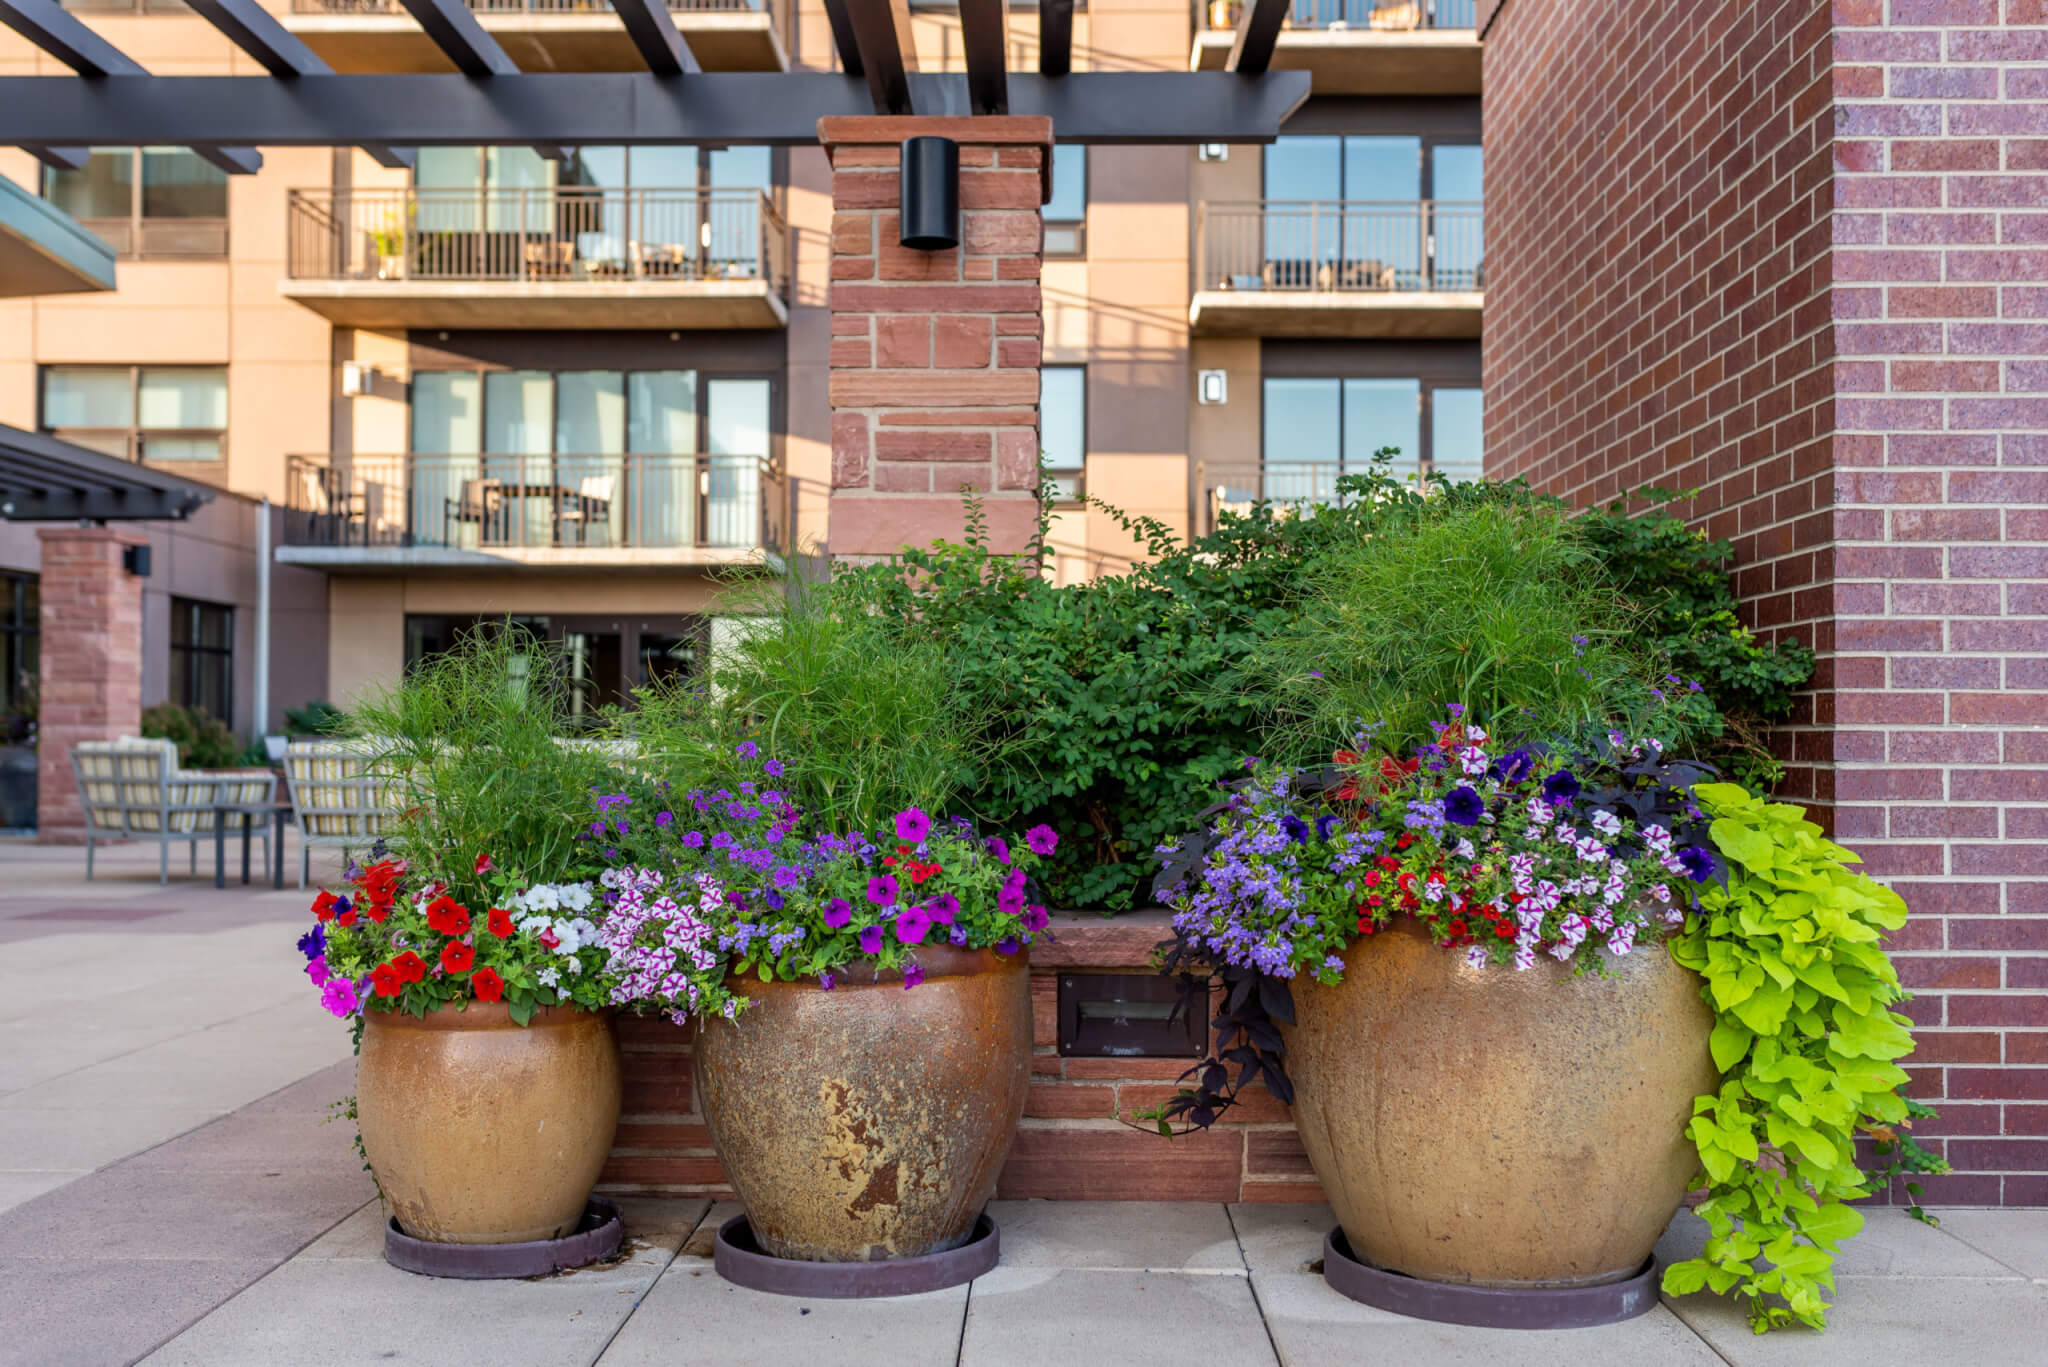 A big clay flower pots filled with colour flower plants in the lawn area of a building